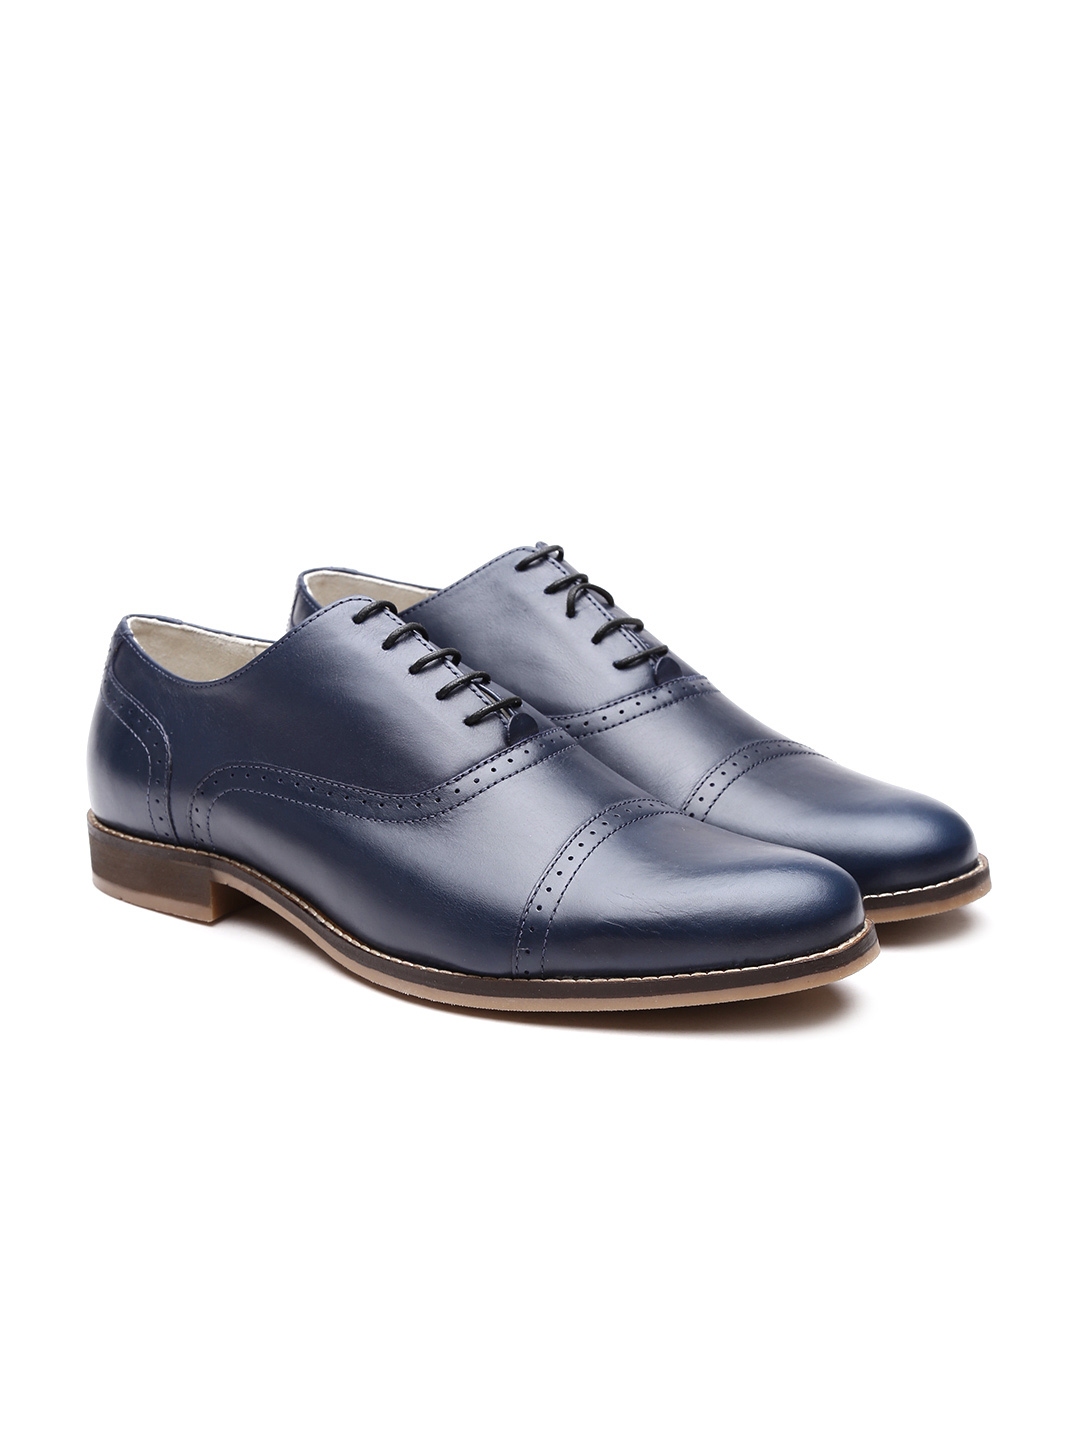 united colors of benetton formal shoes